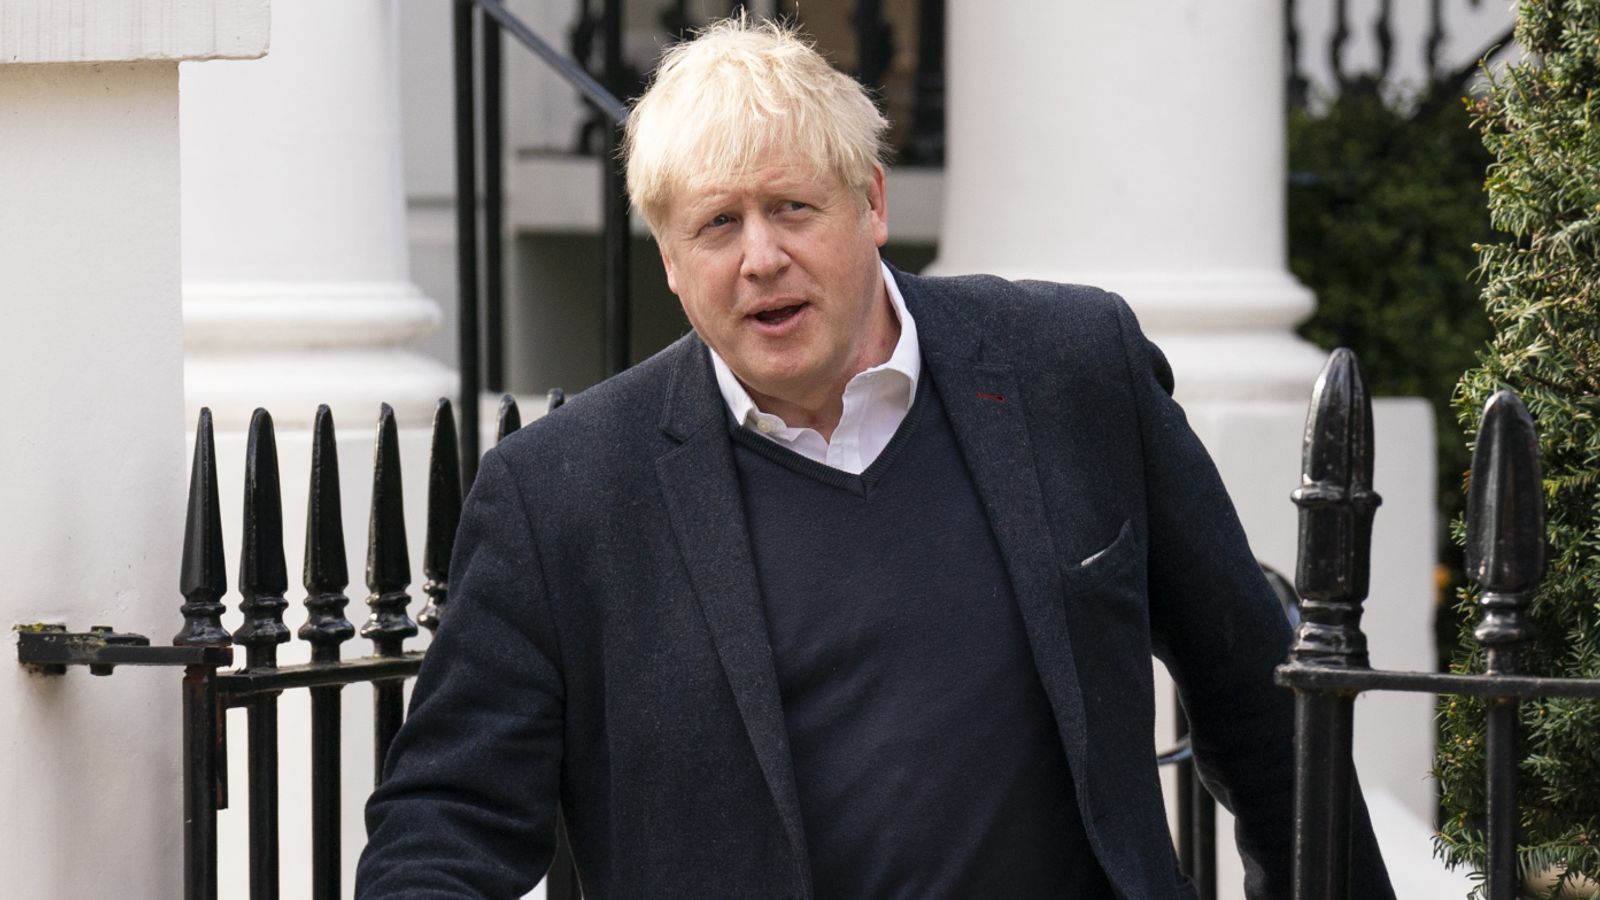 COVID inquiry: Government stands by refusal to hand over Boris Johnson's 'private' WhatsApp messages following criticism